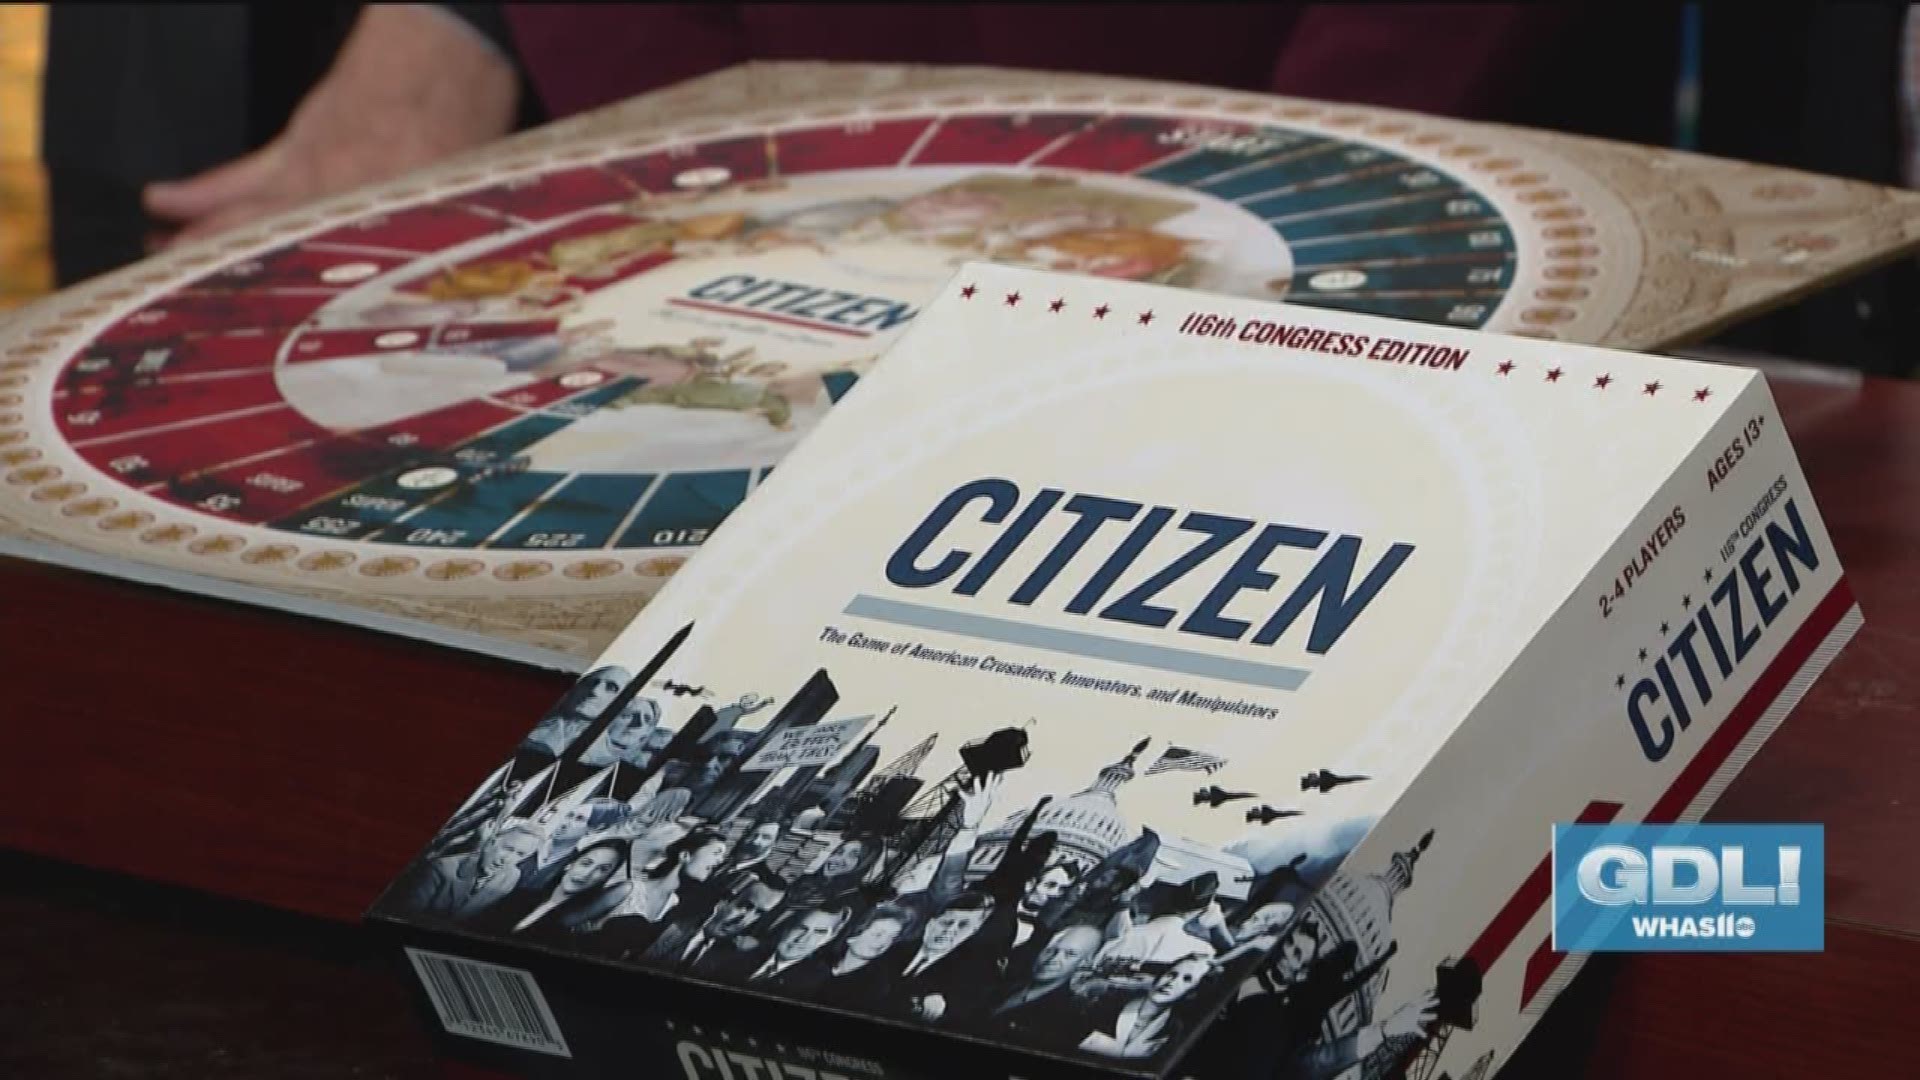 A Kickstarter launch party is being held for Citizen The Game at 5 PM on Thursday, January 17, 2019 at Mile Wide Beer Company at 636  Barret Avenue in Louisville, KY.